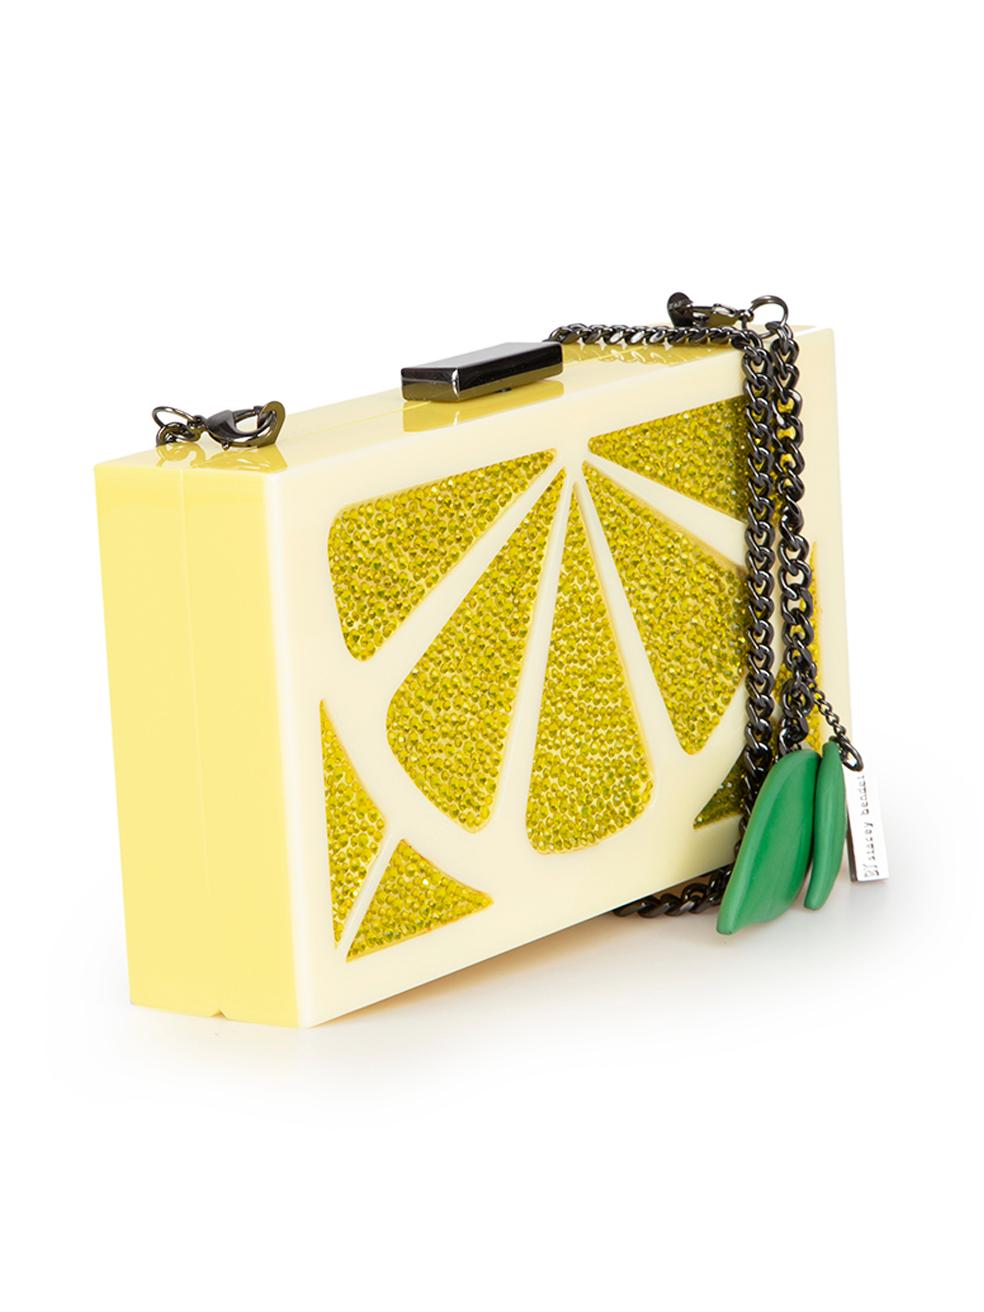 CONDITION is Very good. Minimal wear to bag is evident. Minimal wear to the back and base with light scratches on this used Alice + Olivia designer resale item.
 
 Details
 Cindy Lemon Clutch
 Yellow
 Perspex acrylic
 Mini clutch
 Lemon pattern
